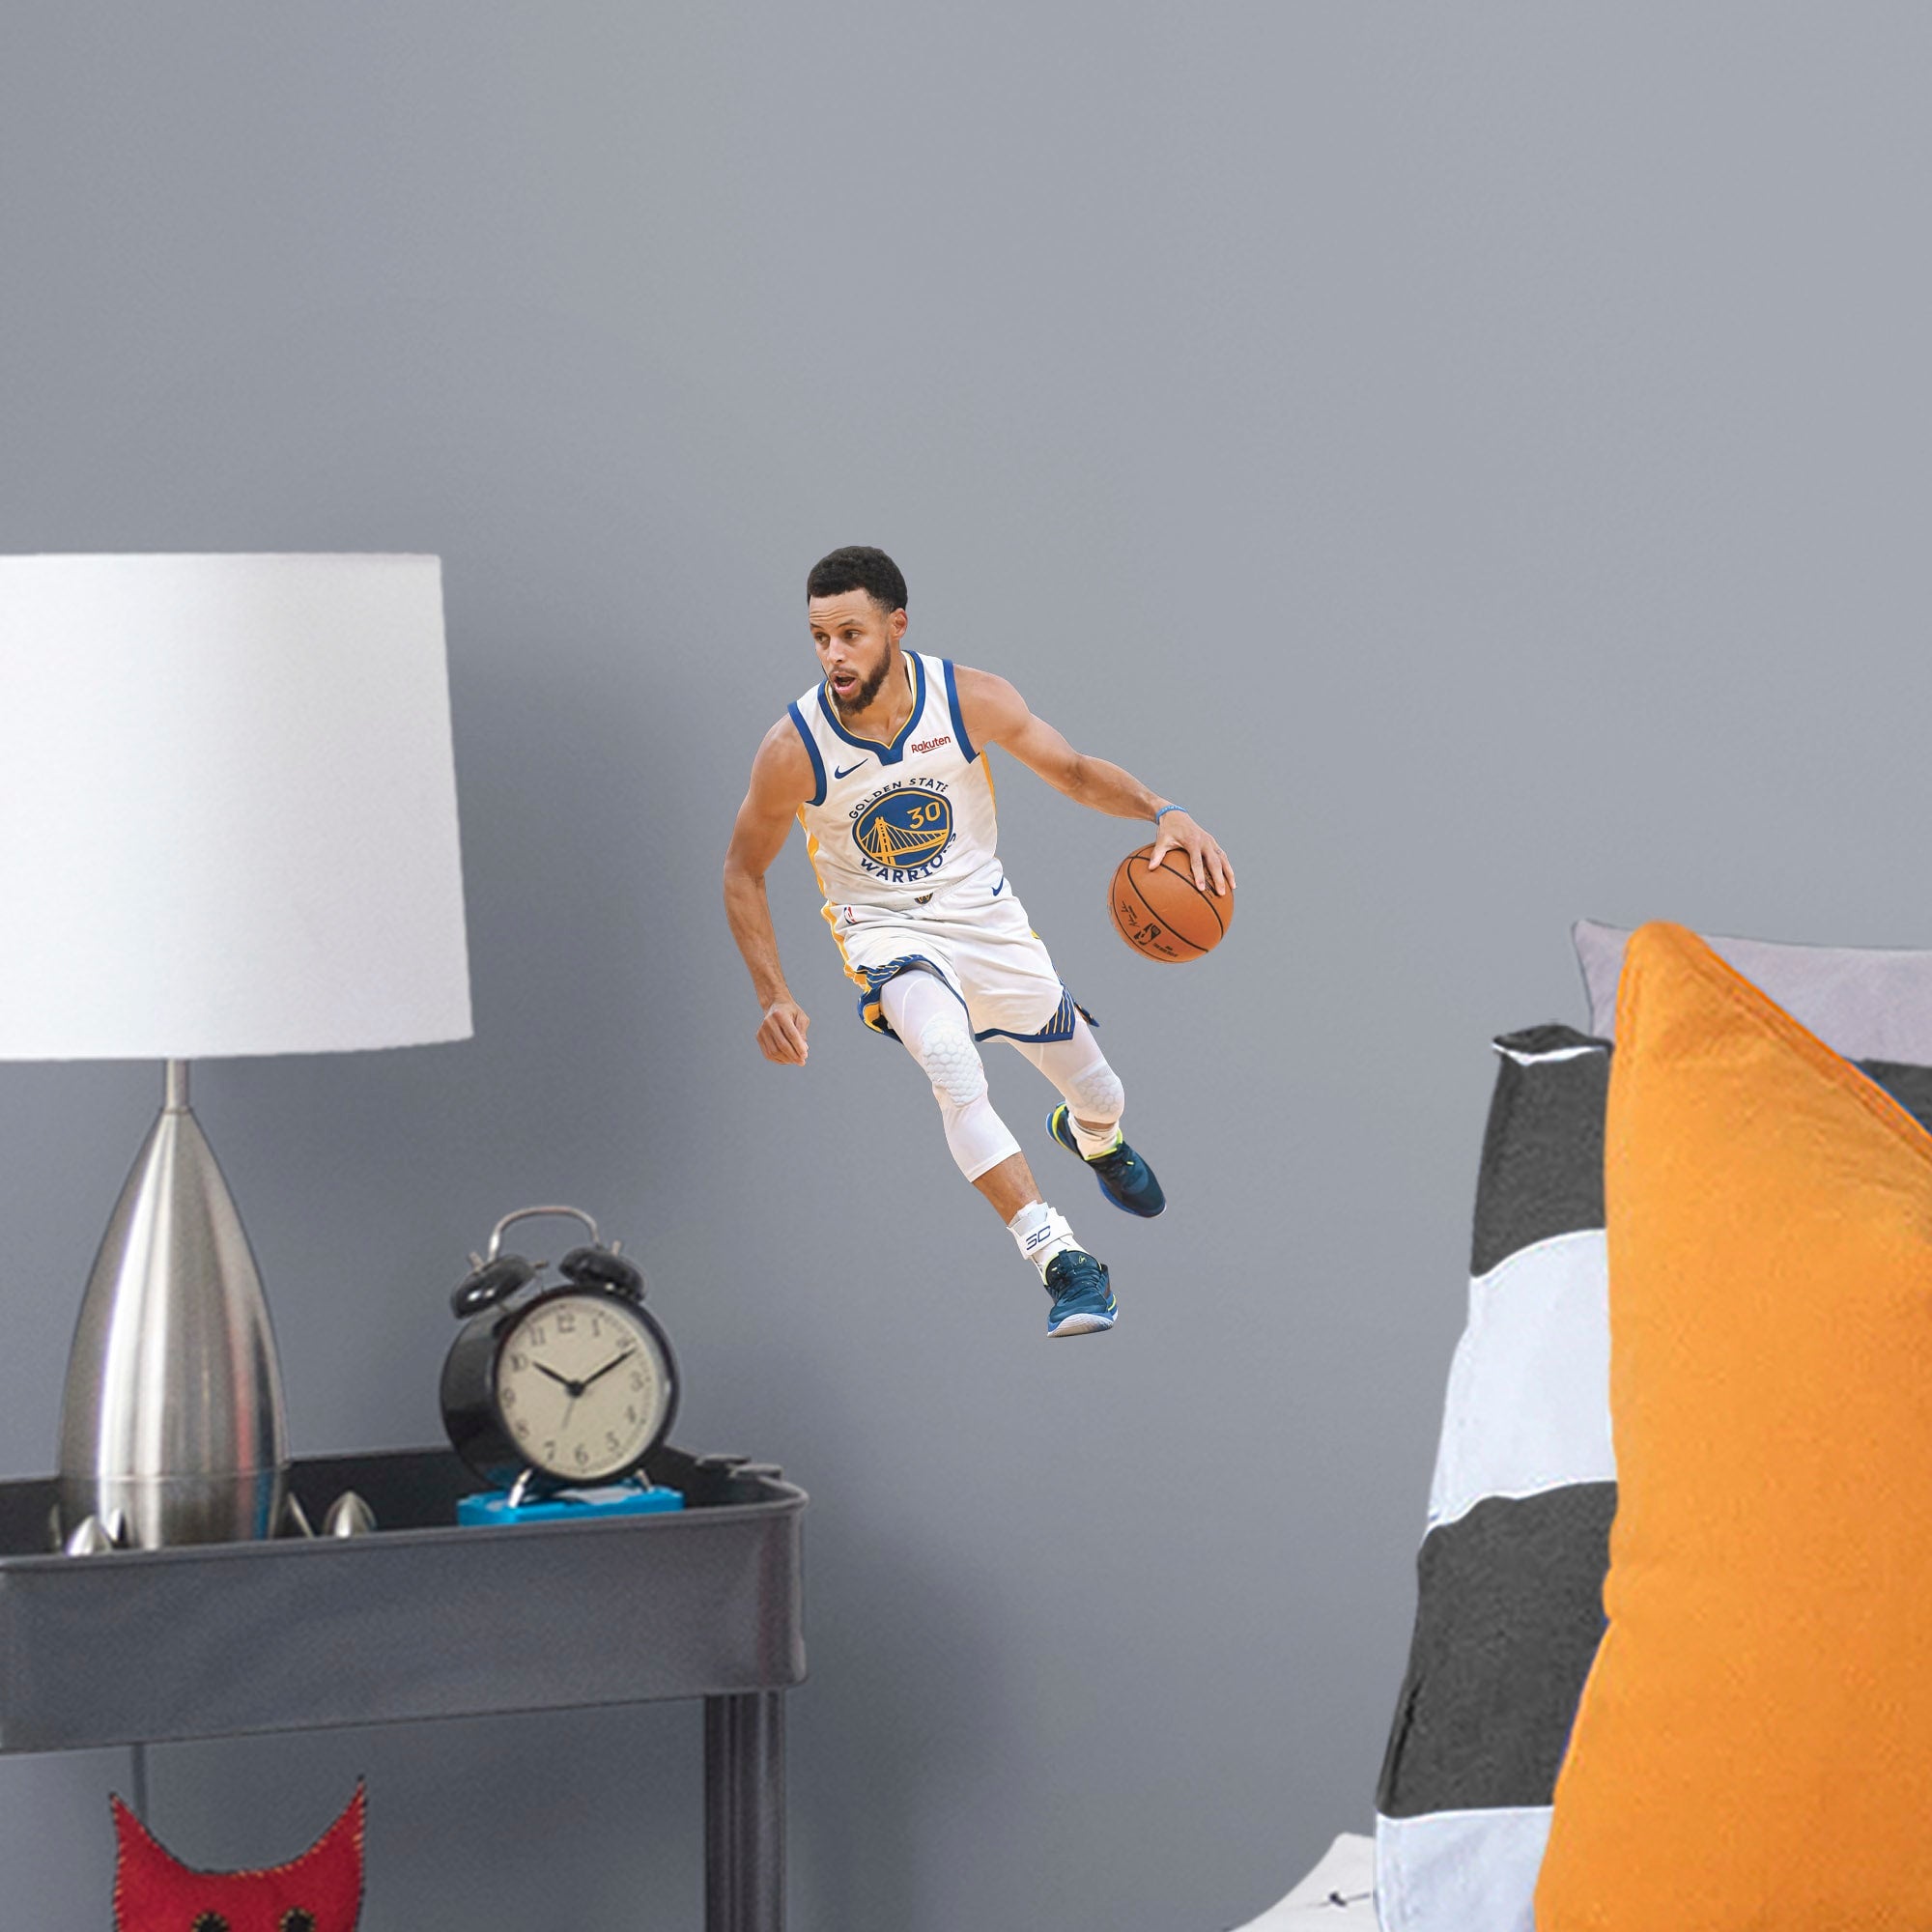 Stephen Curry for Golden State Warriors - Officially Licensed NBA Removable Wall Decal 47.0"W x 72.0"H by Fathead | Vinyl